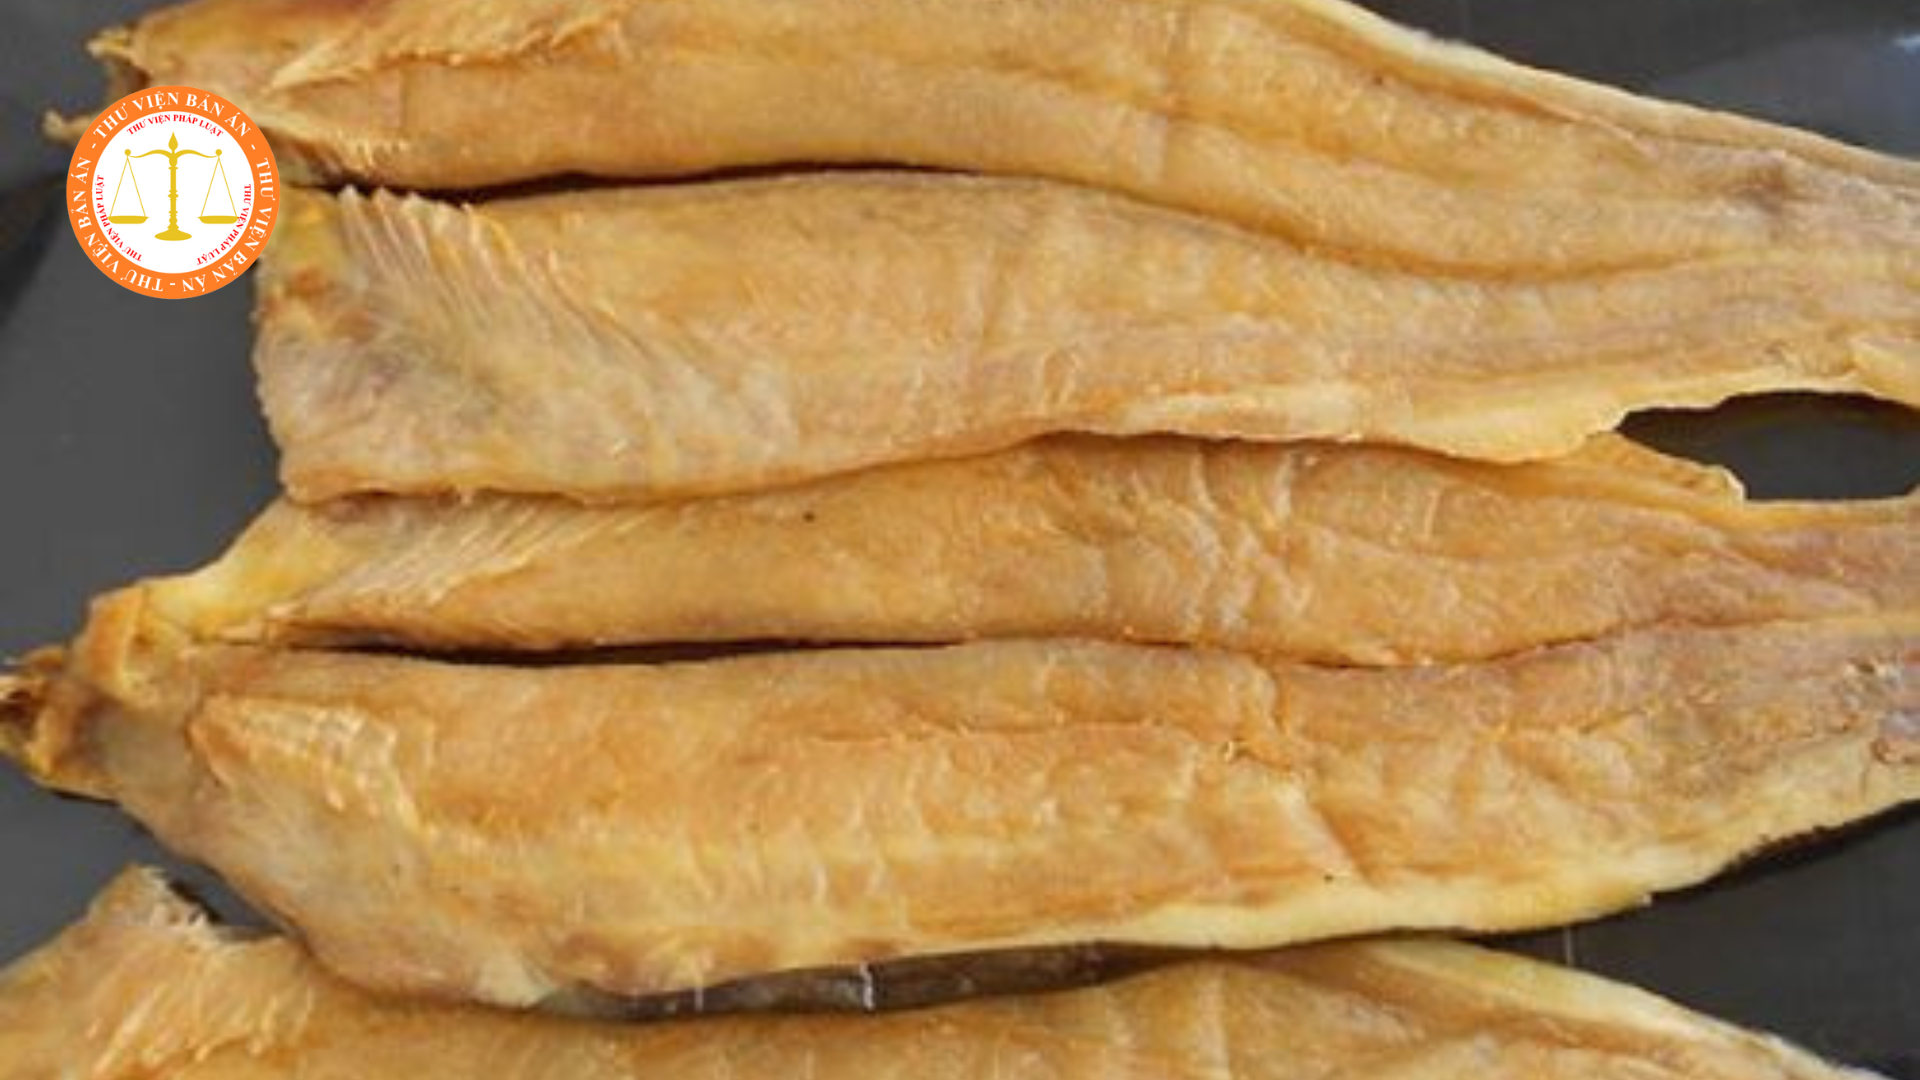 What is puffed dried catfish? Sensory criteria, physico-chemical standards, and heavy metal limits of puffed dried catfish in Vietnam